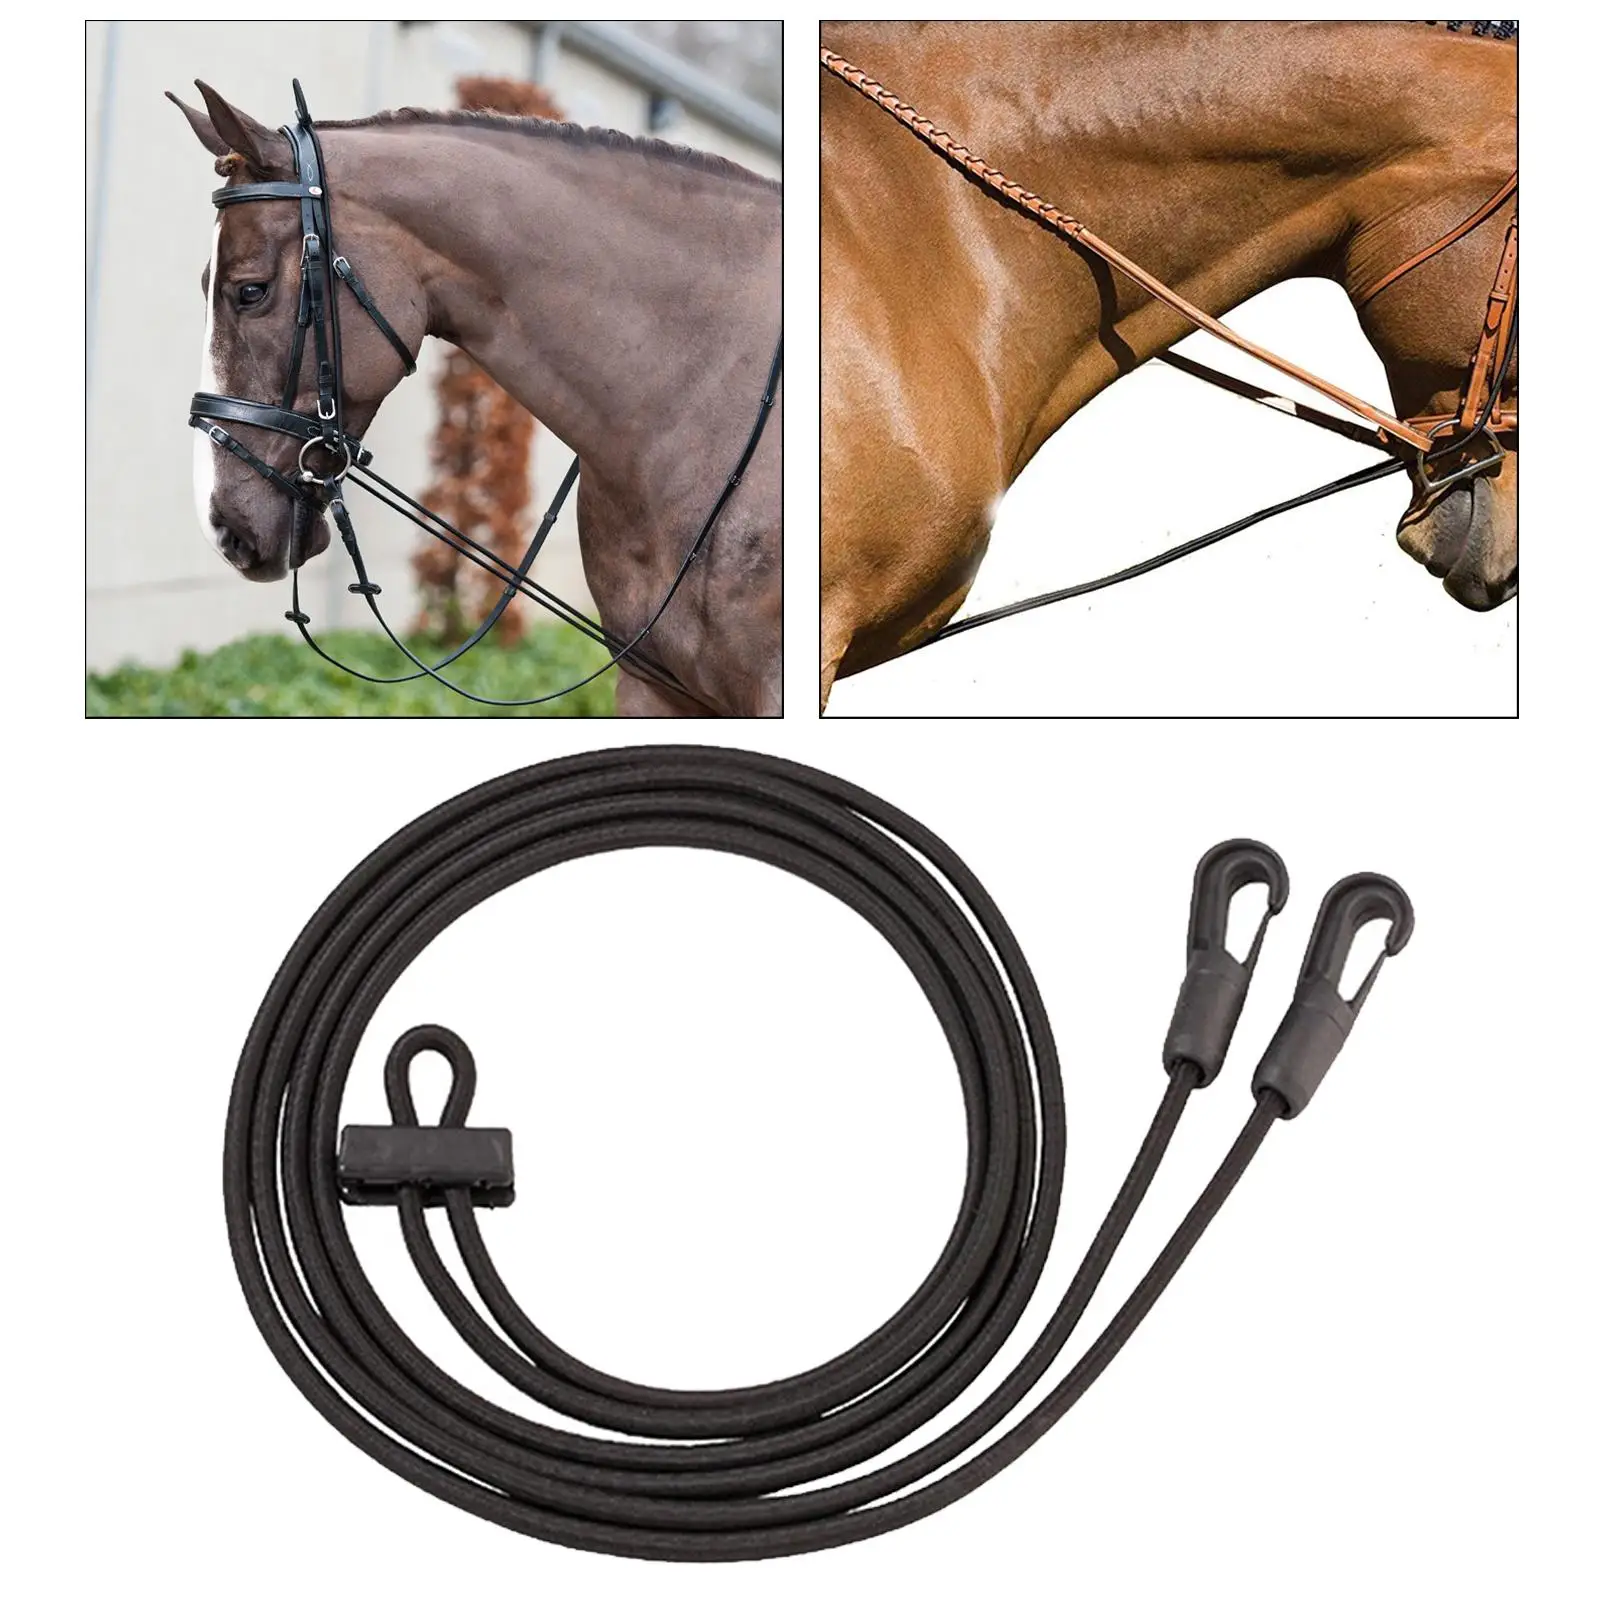 Horse Auxiliary Reins Comfortable Leading Elastic Training Rope for Riding